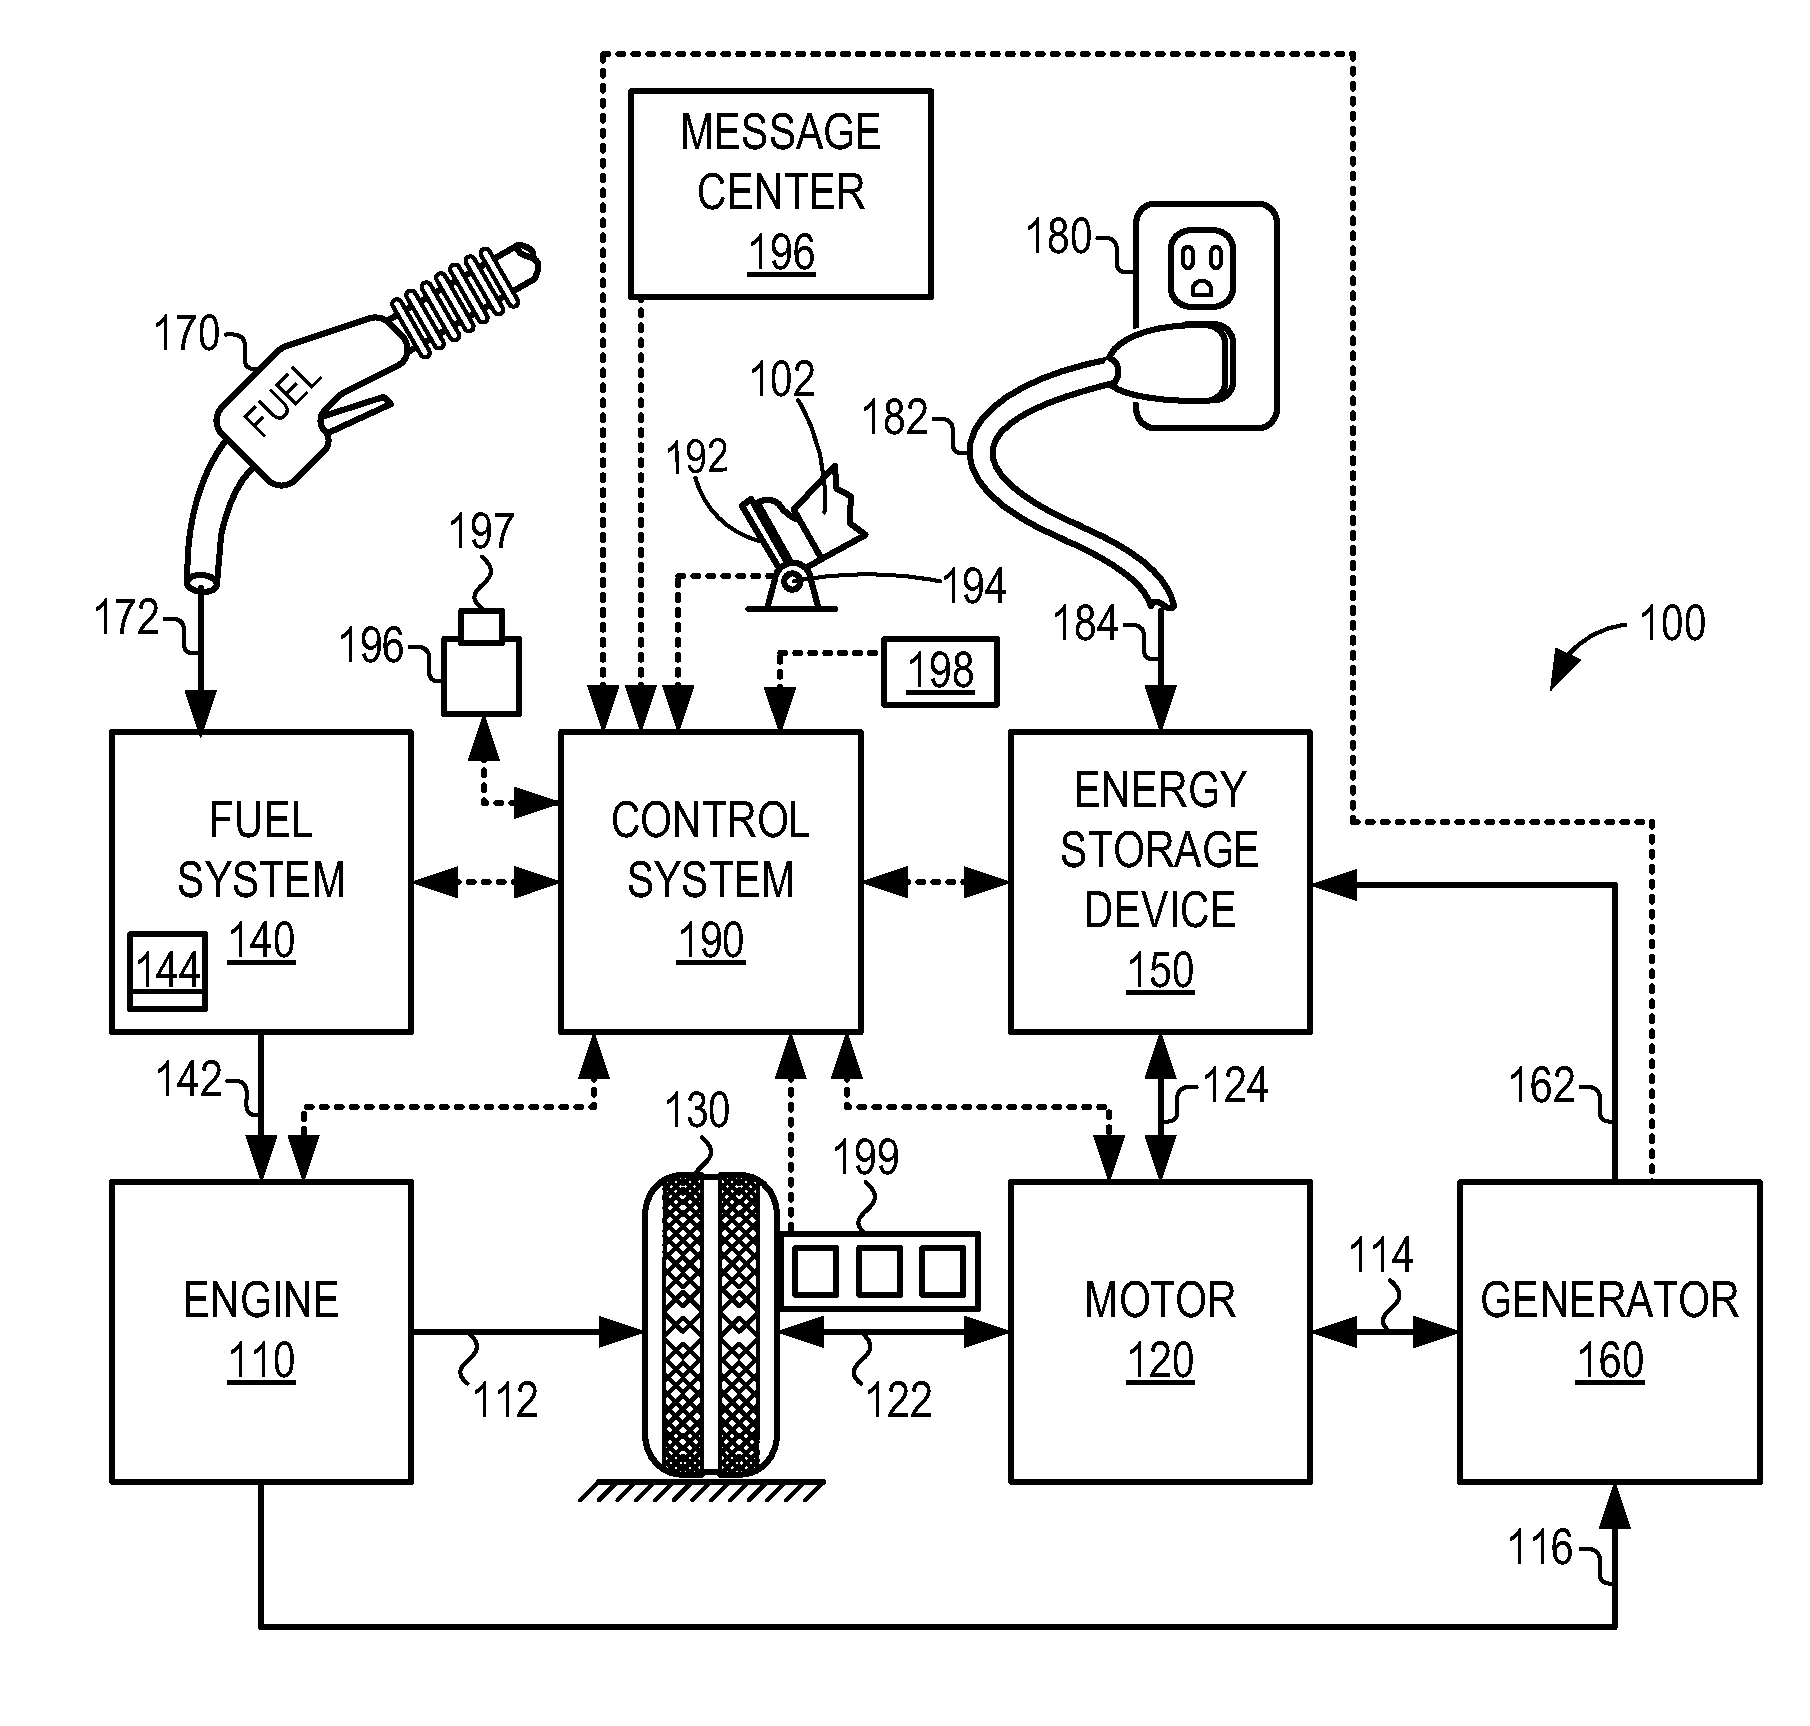 System and methods for refueling a vehicle